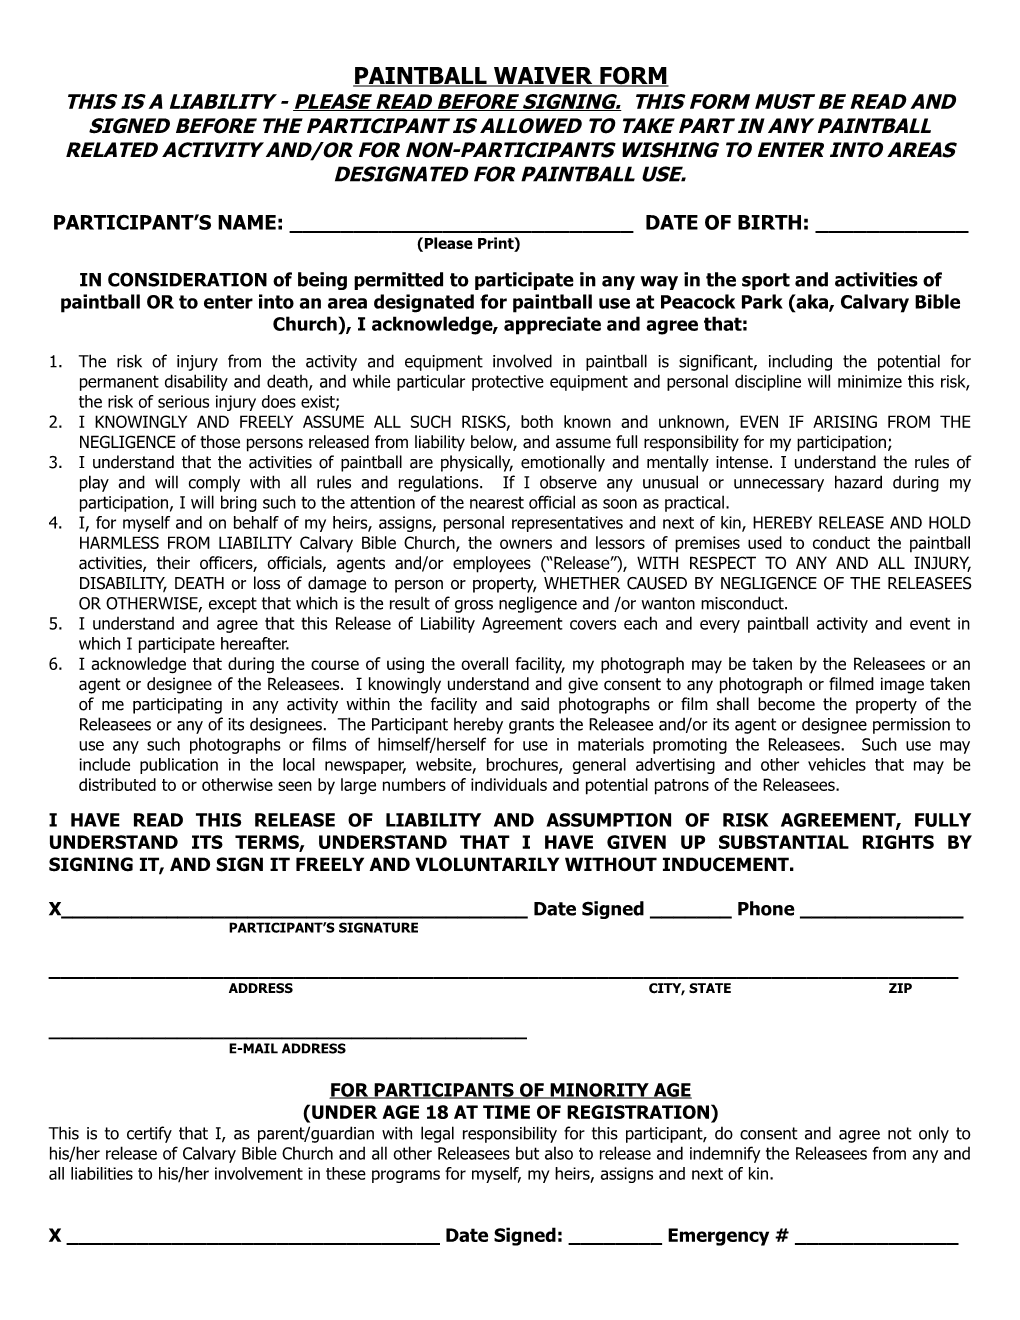 Paintball Waiver Form